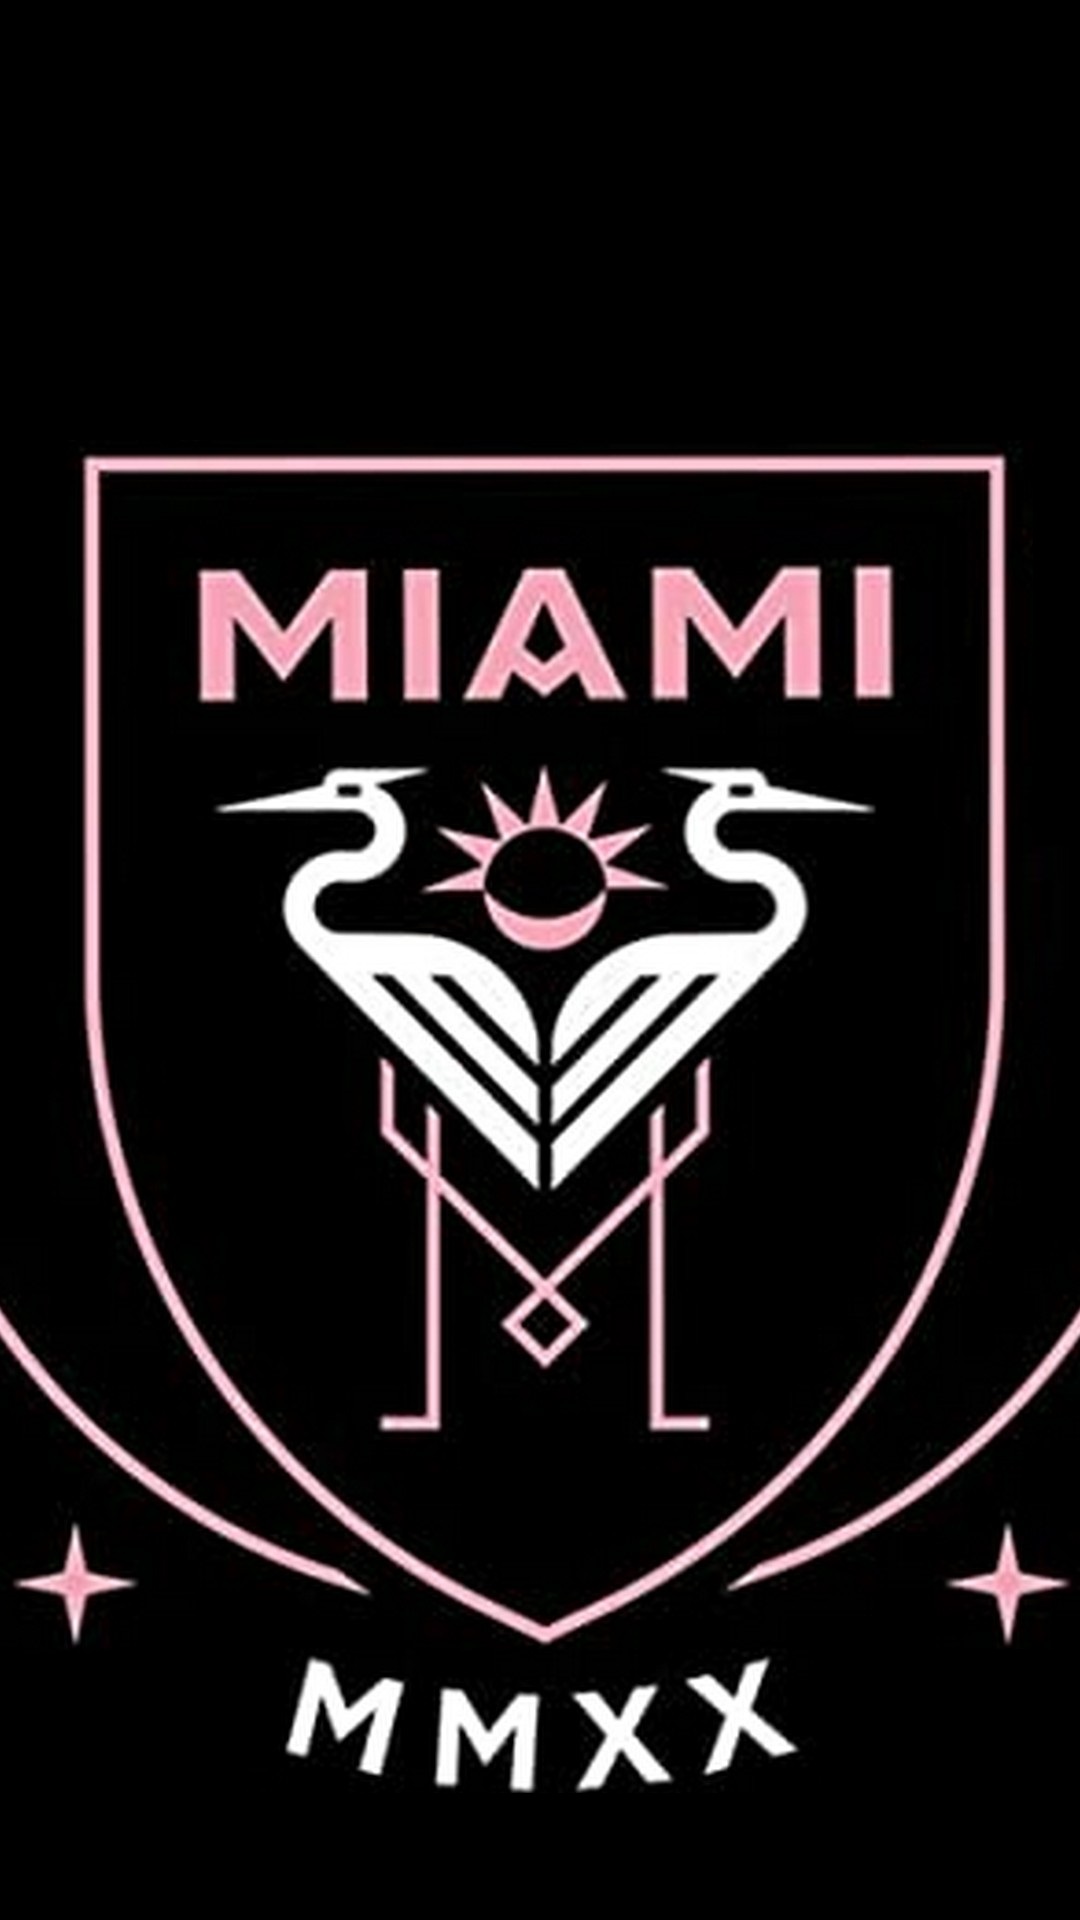 Mobile Wallpaper Inter Miami with high-resolution 1080x1920 pixel. You can use this wallpaper for your Desktop Computers, Mac Screensavers, Windows Backgrounds, iPhone Wallpapers, Tablet or Android Lock screen and another Mobile device